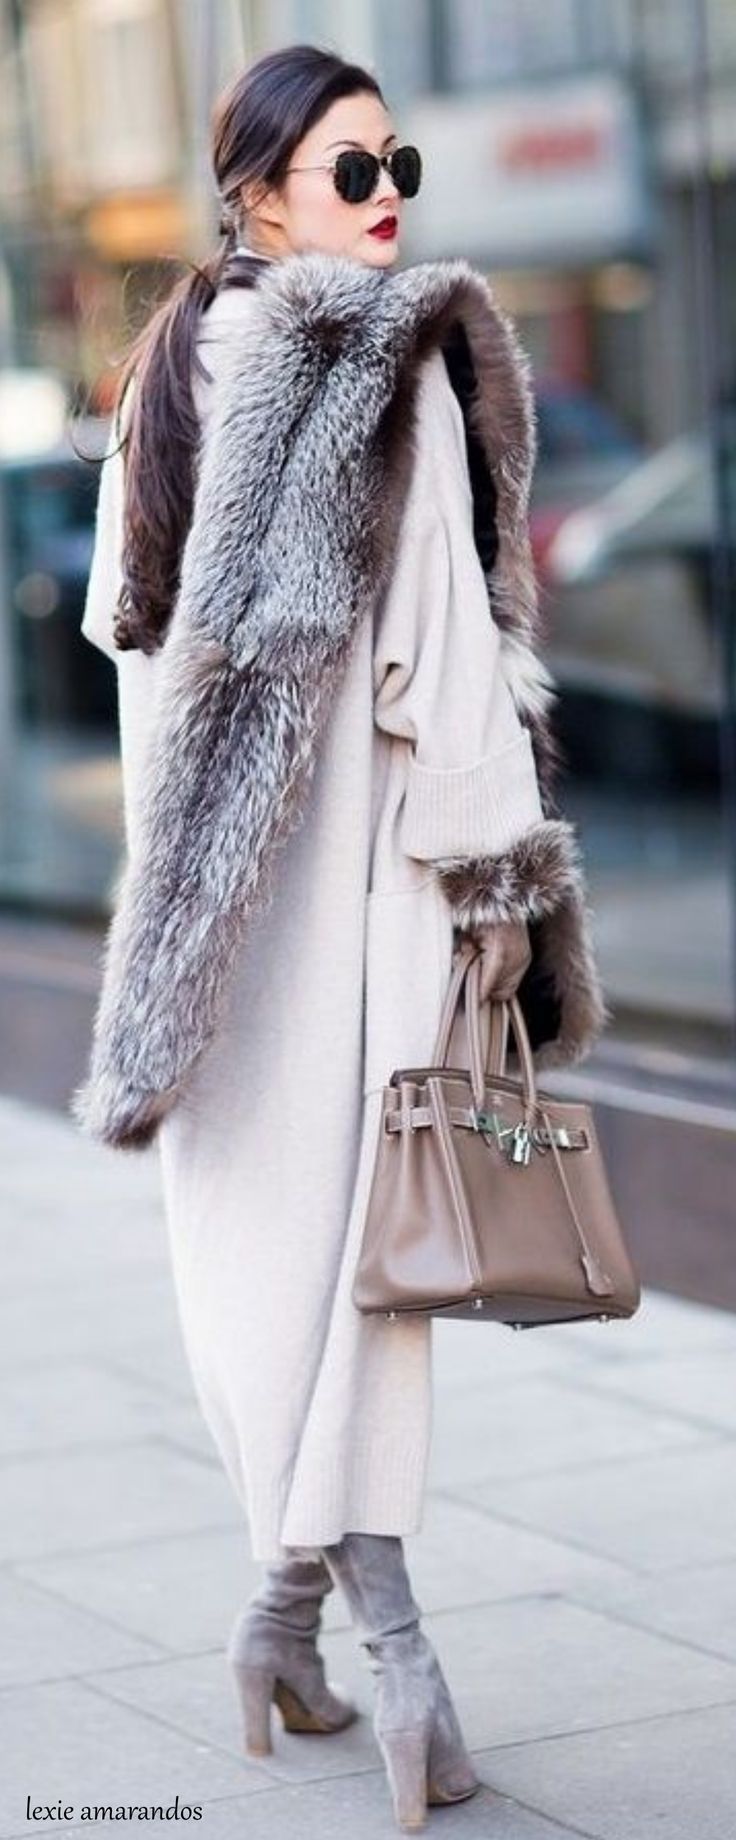 That coat! The fur!! Those boots!!! Love it all. And Hermes ~ Birkin Brown Leath...